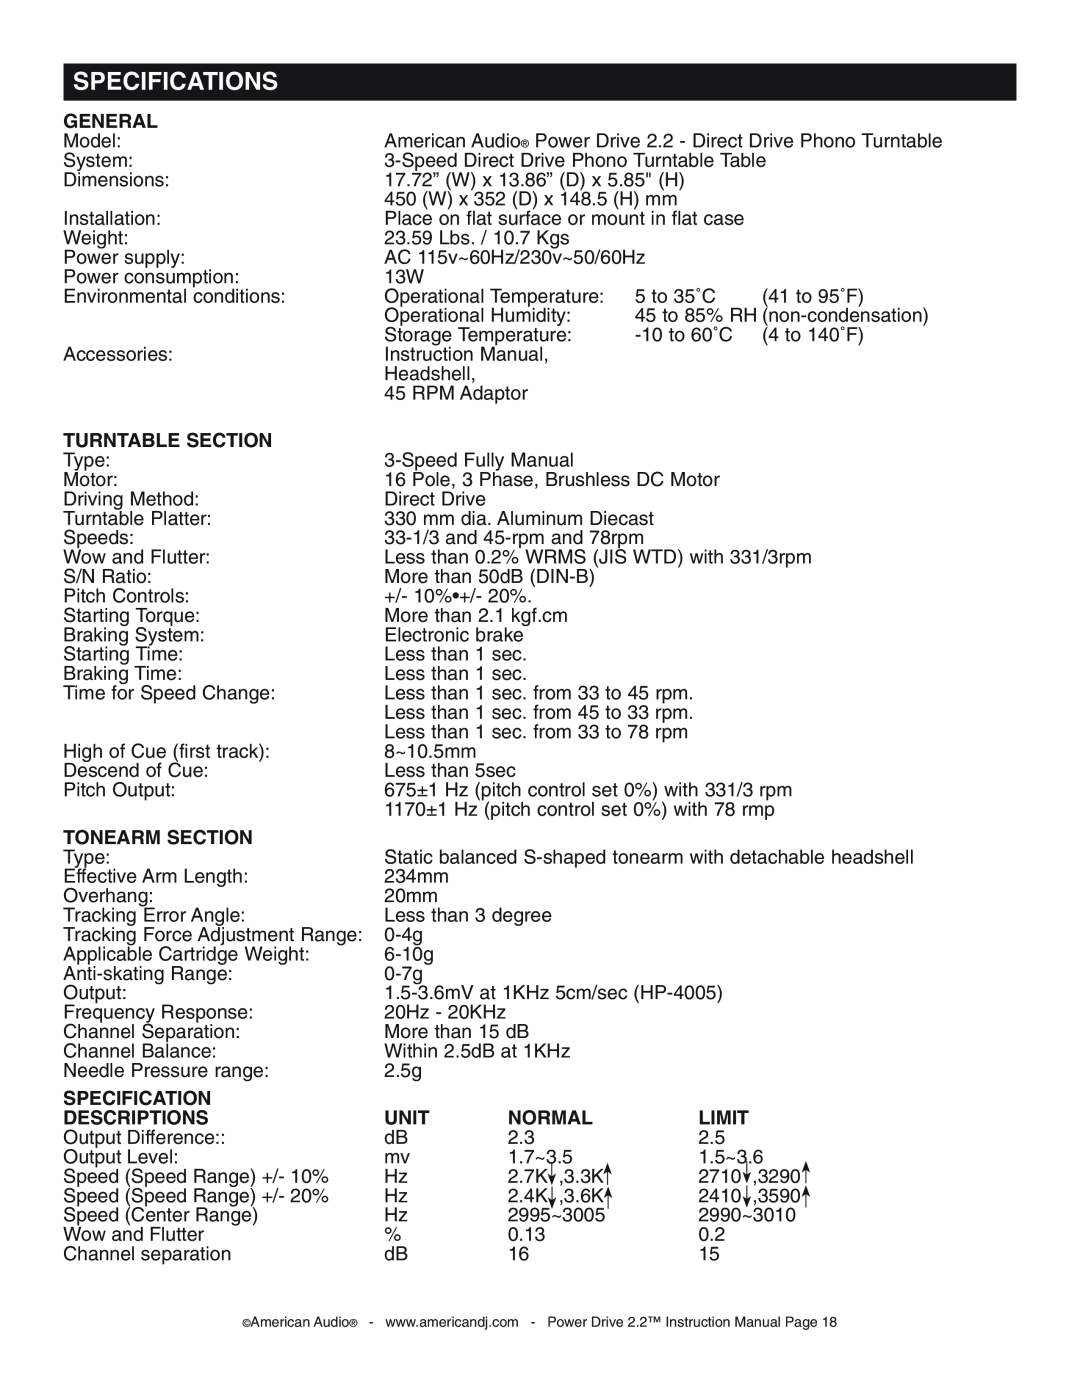 American Audio POWERDRIVE22.pdf Specifications, General, Turntable Section, Tonearm Section, Descriptions, Unit, Normal 